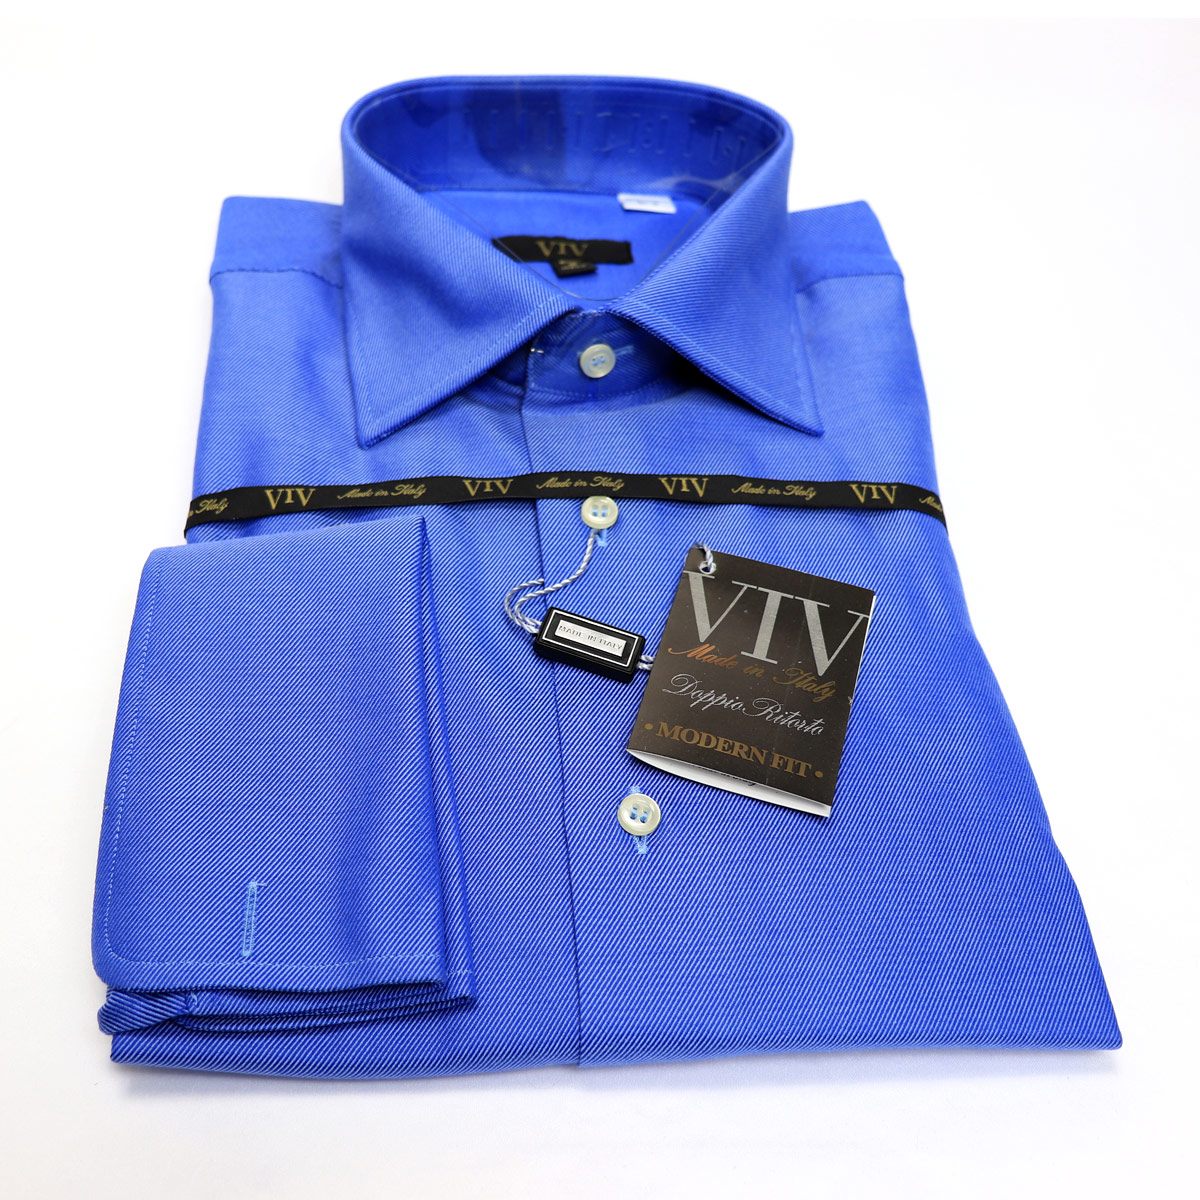 see other double cuffs too Men's Blue Double Cuff Italian Slim Fit Shirt 